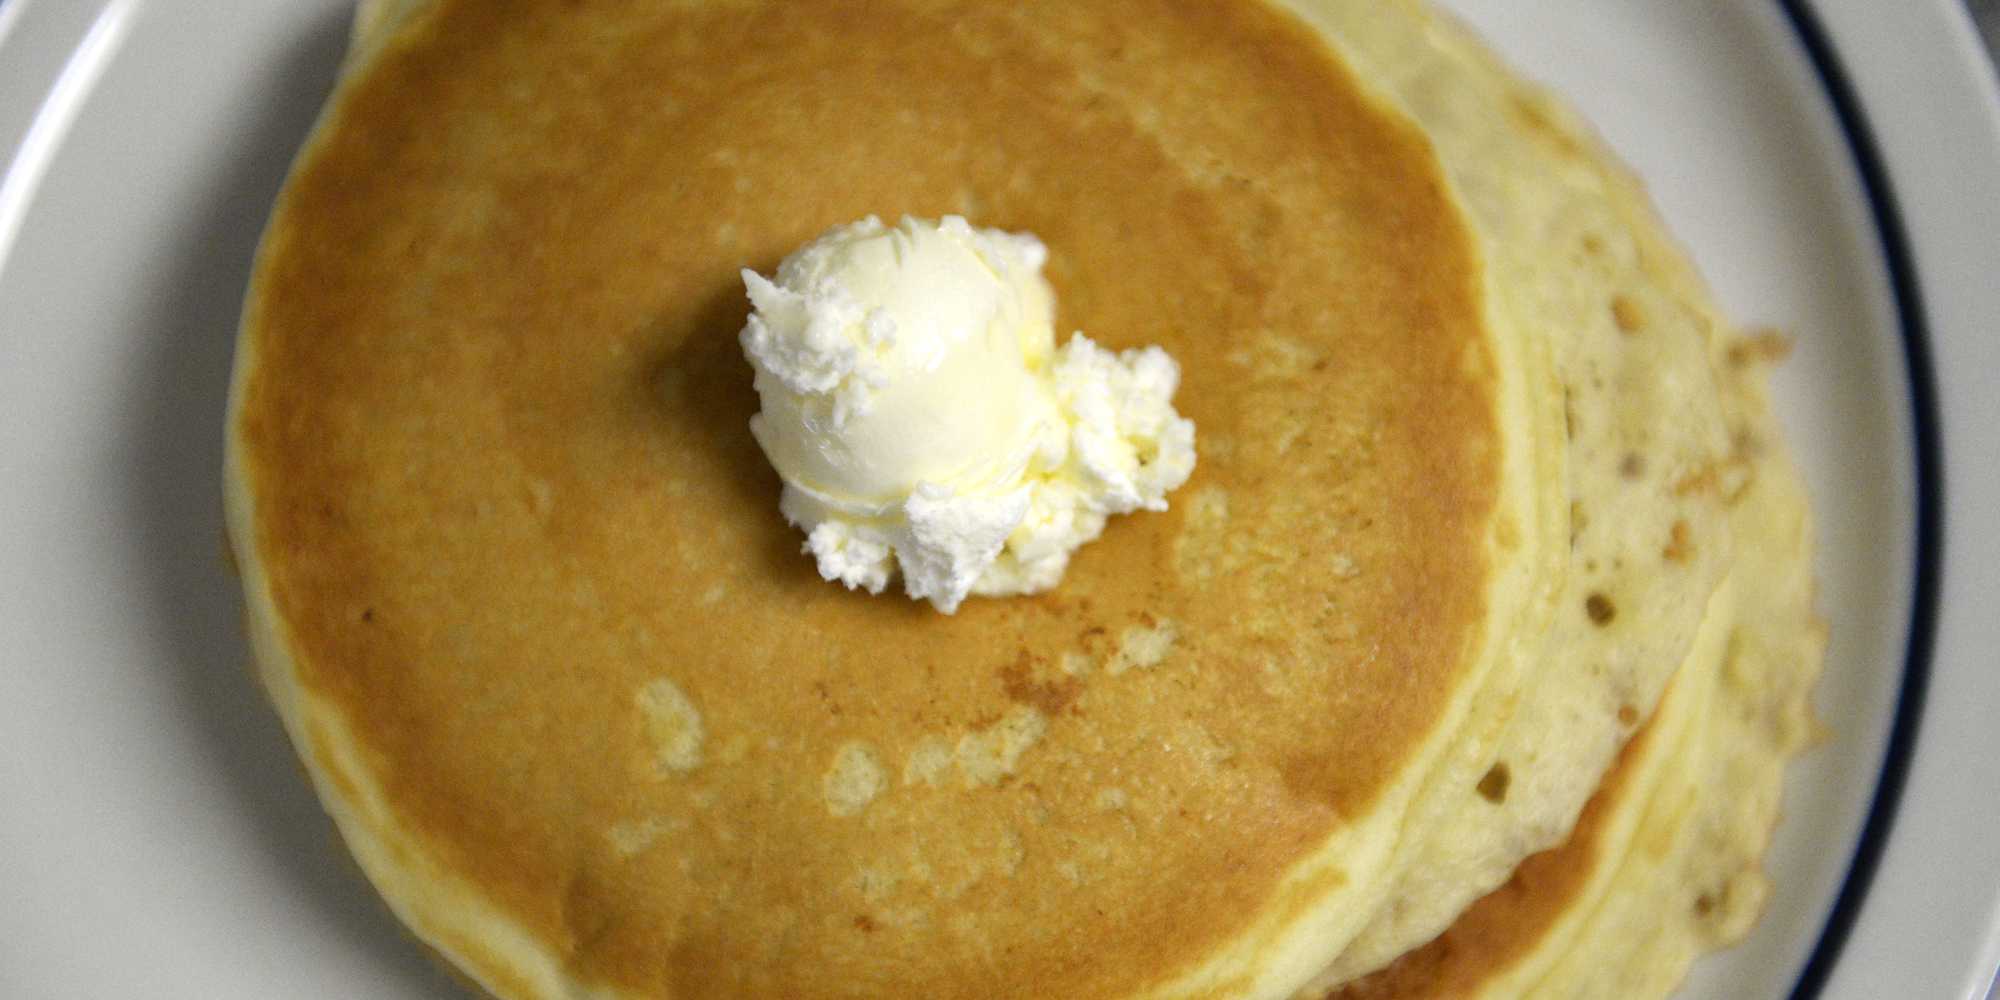 How to get free pancakes at IHOP for National Pancake Day